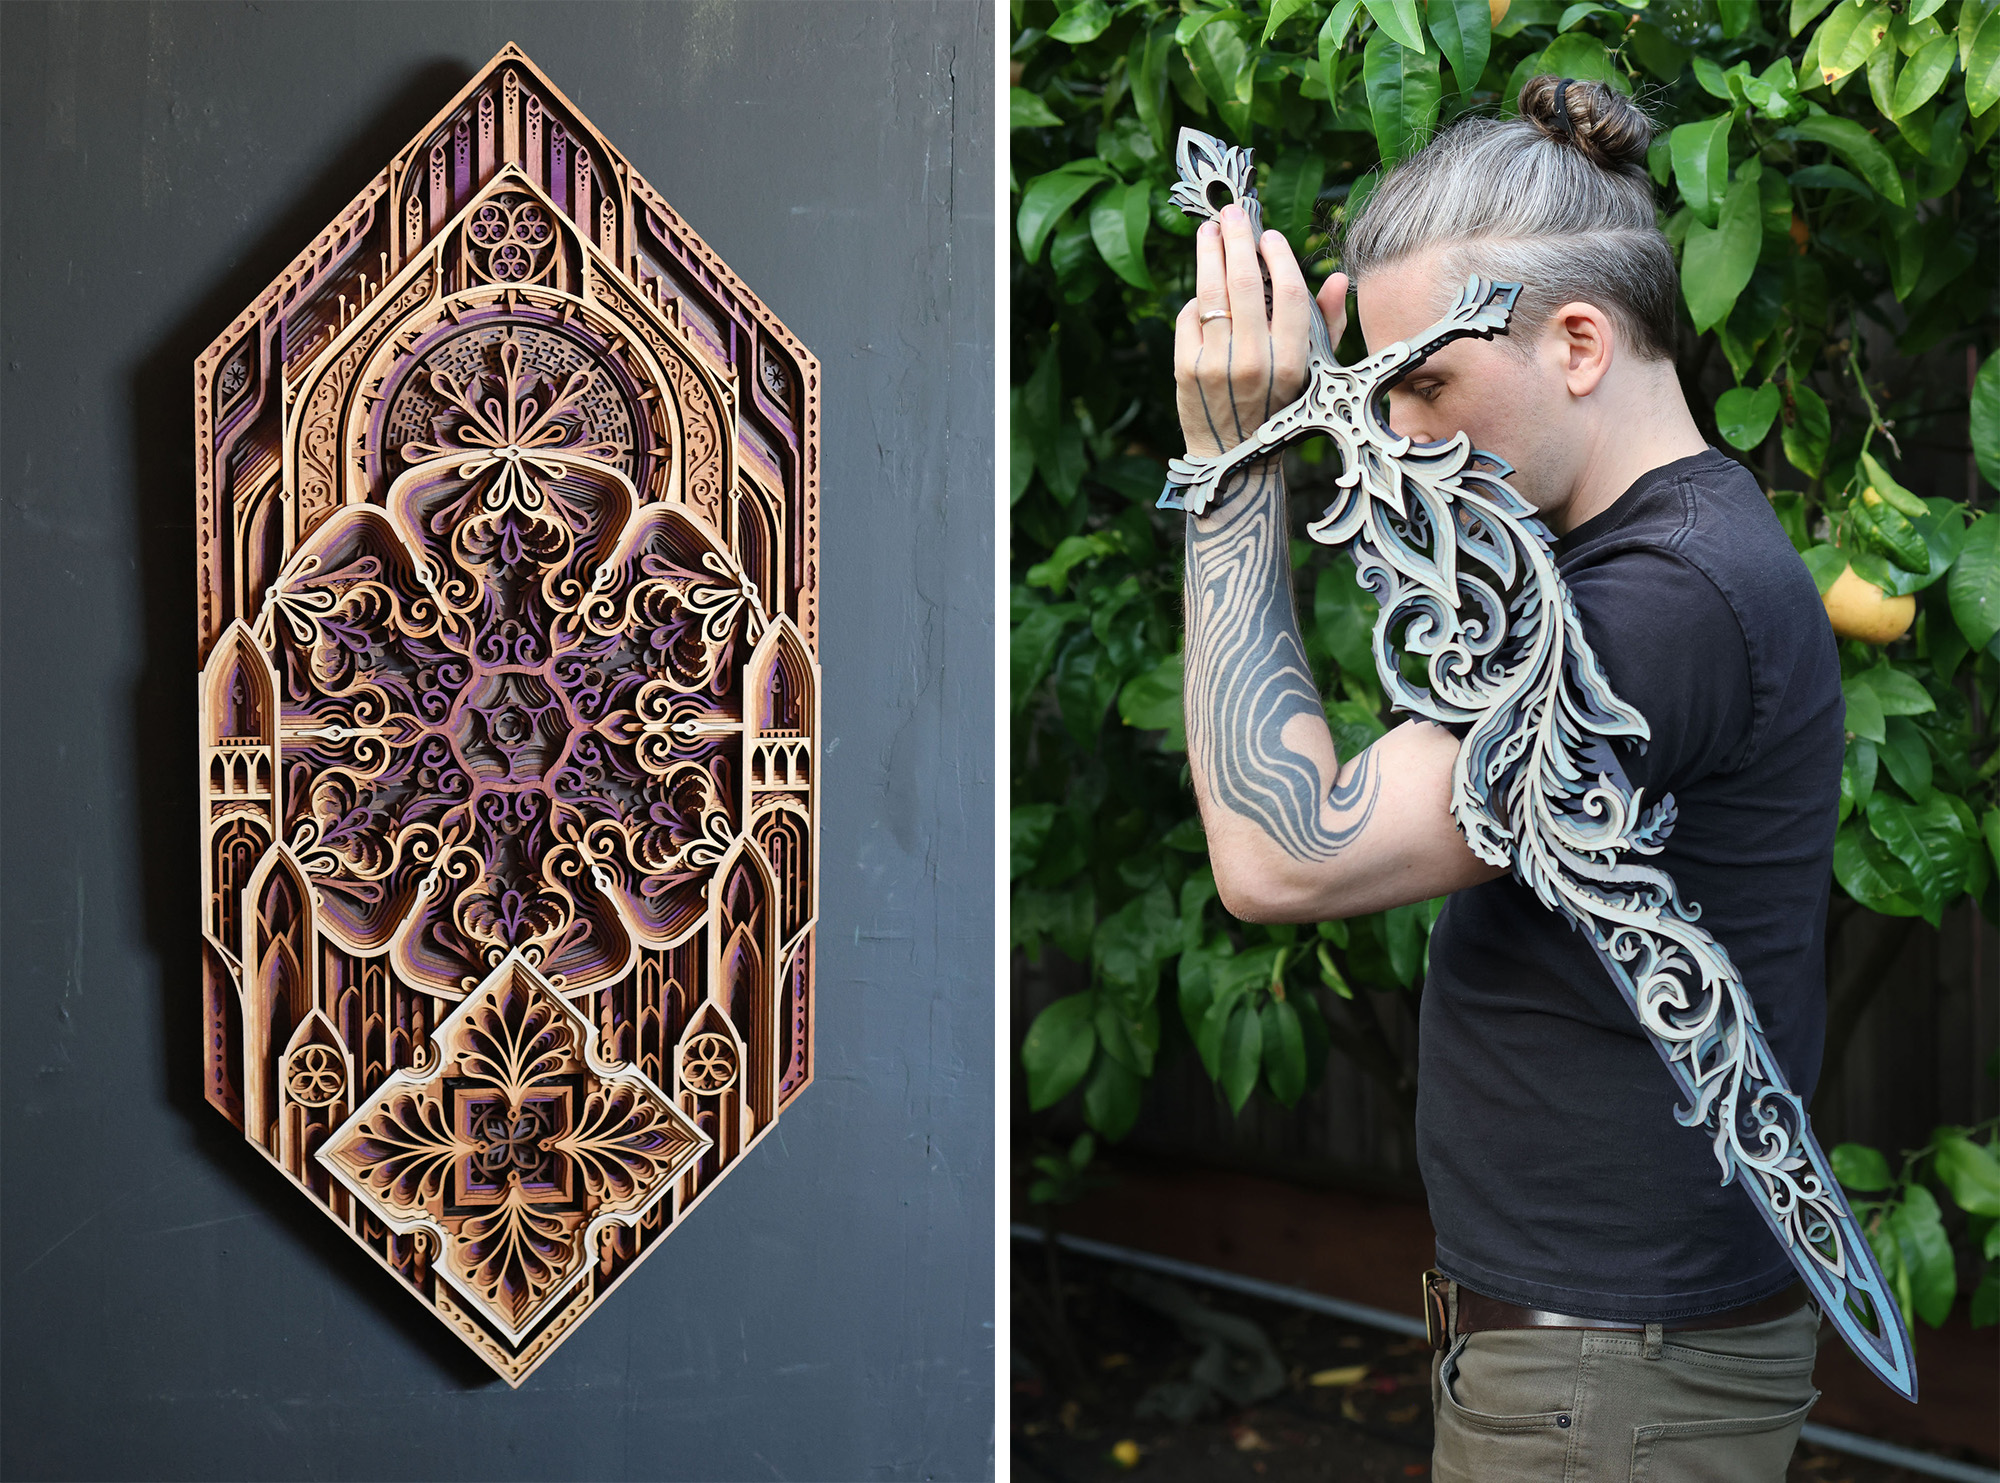 Two images side-by-side. The left-side image shows a wall relief made from layers of laser-cut plywood. The right side shows a man holding a sword made from layers of wood.